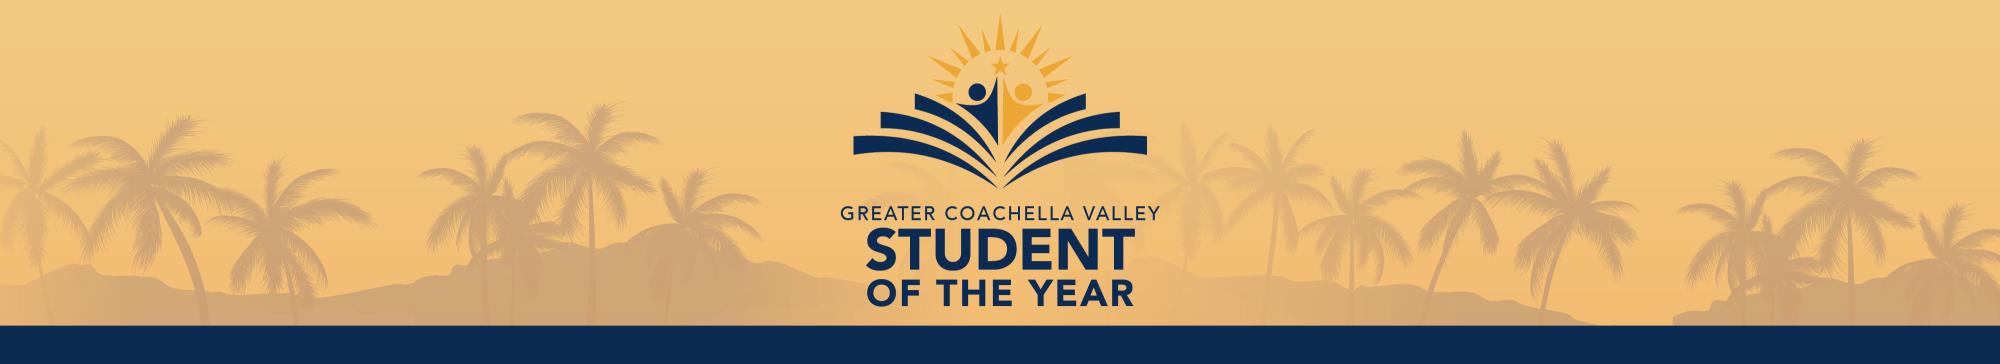 GCV Student Of The Year